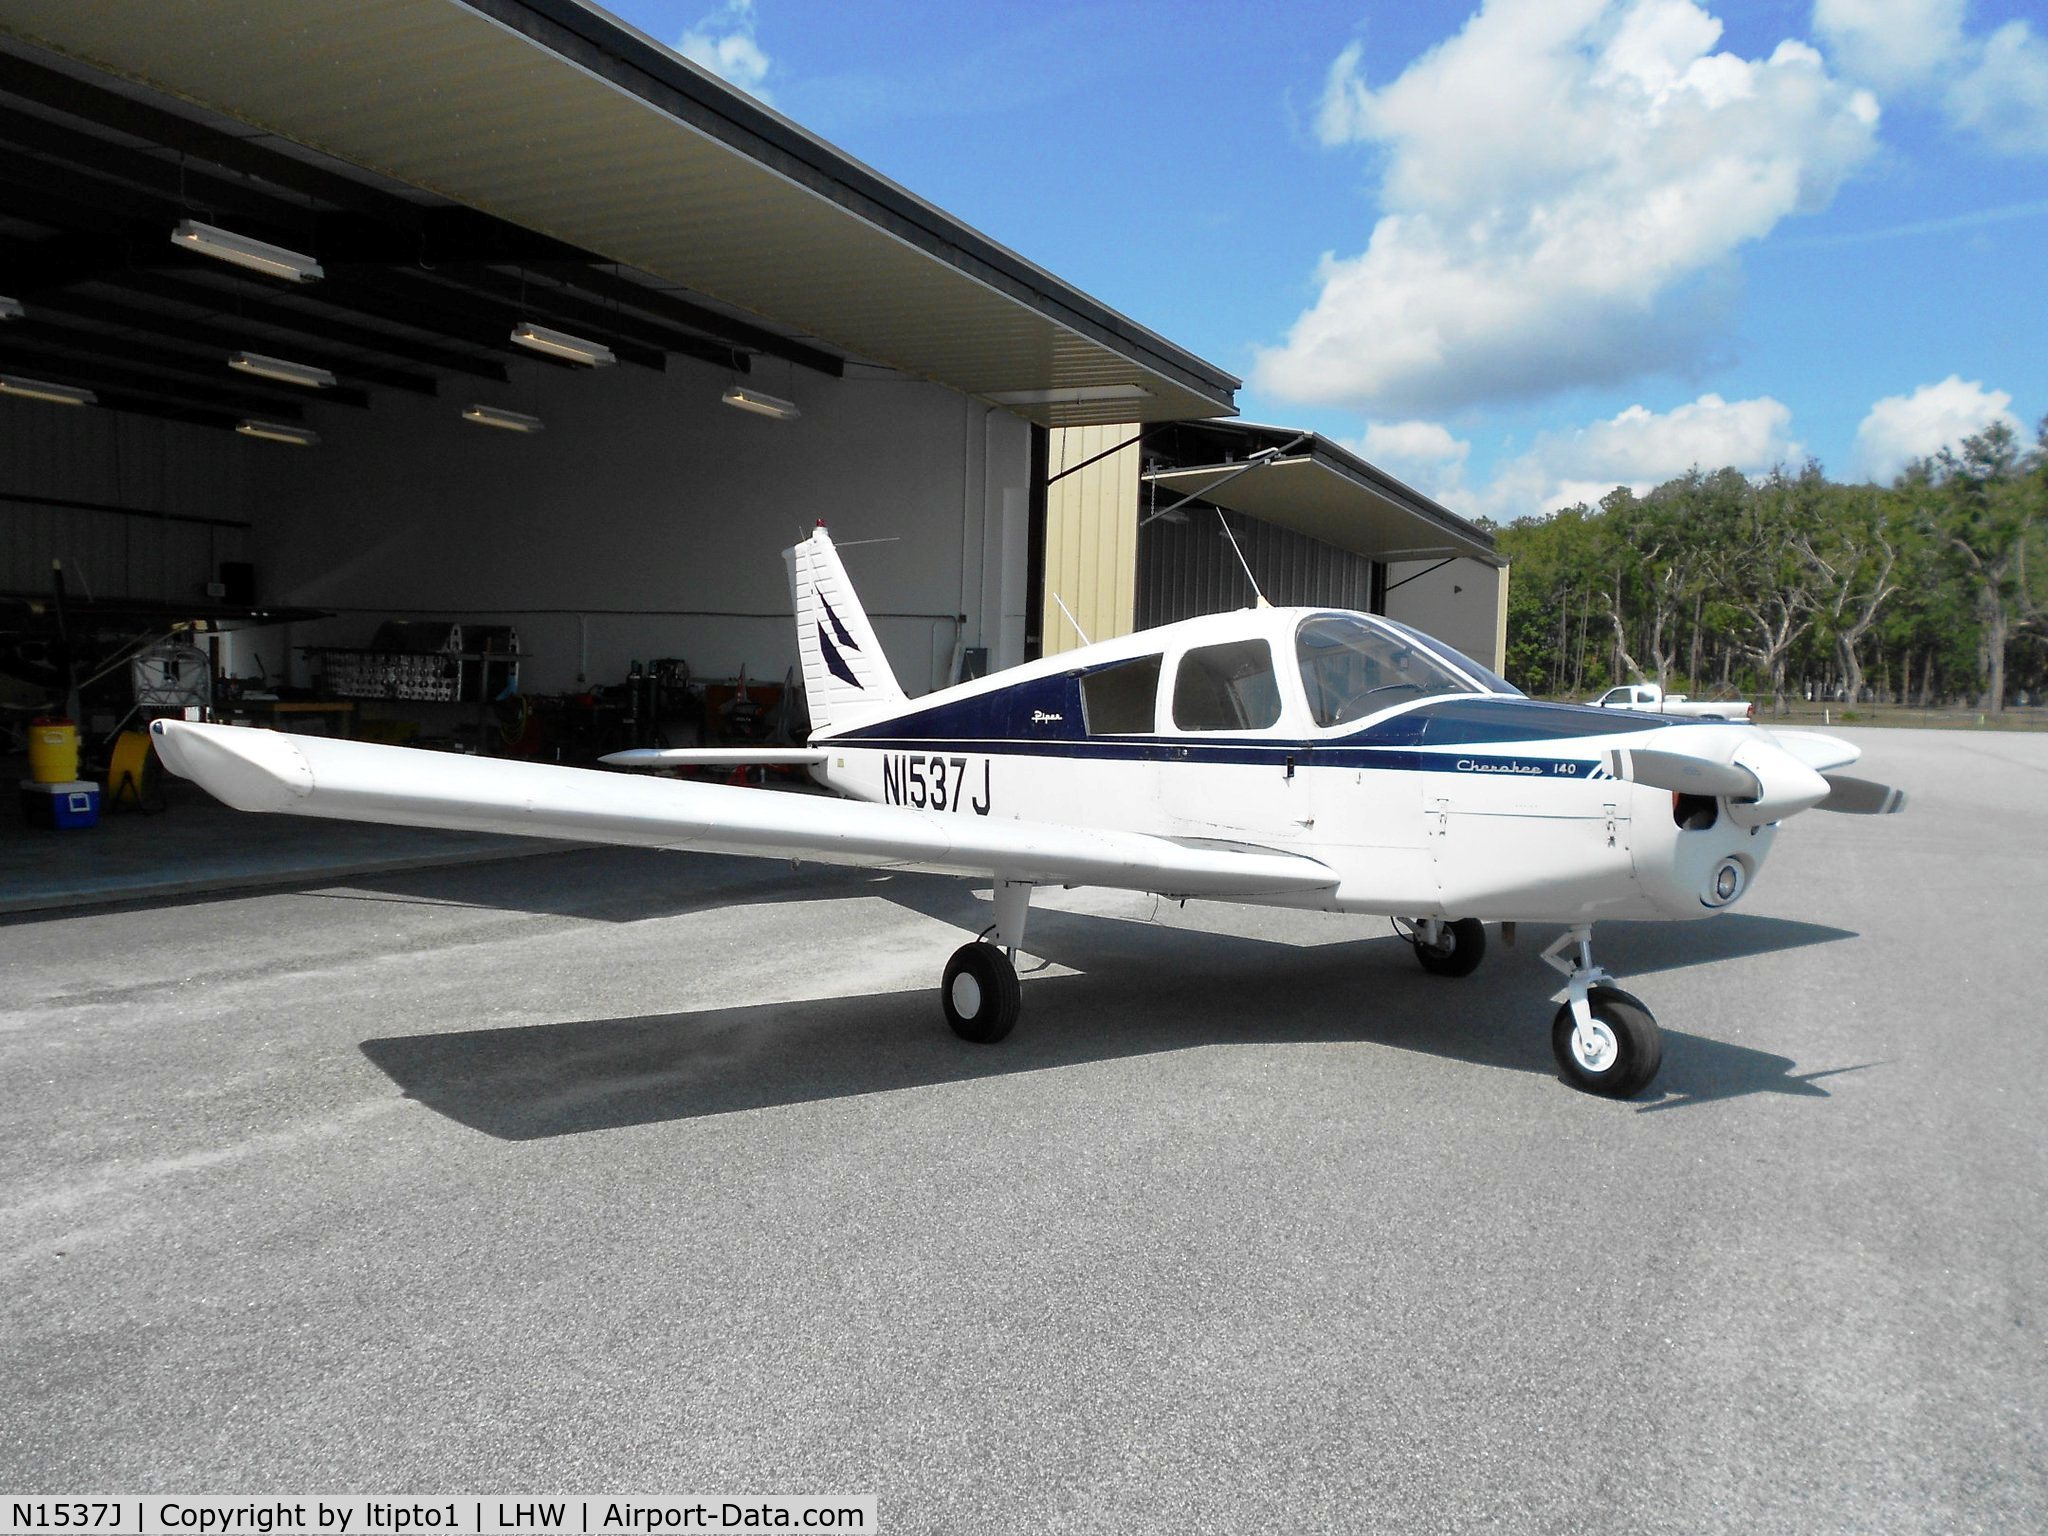 N1537J, 1968 Piper PA-28-140 C/N 28-23938, On the ground in Georgia, ready to head to Iowa for good...